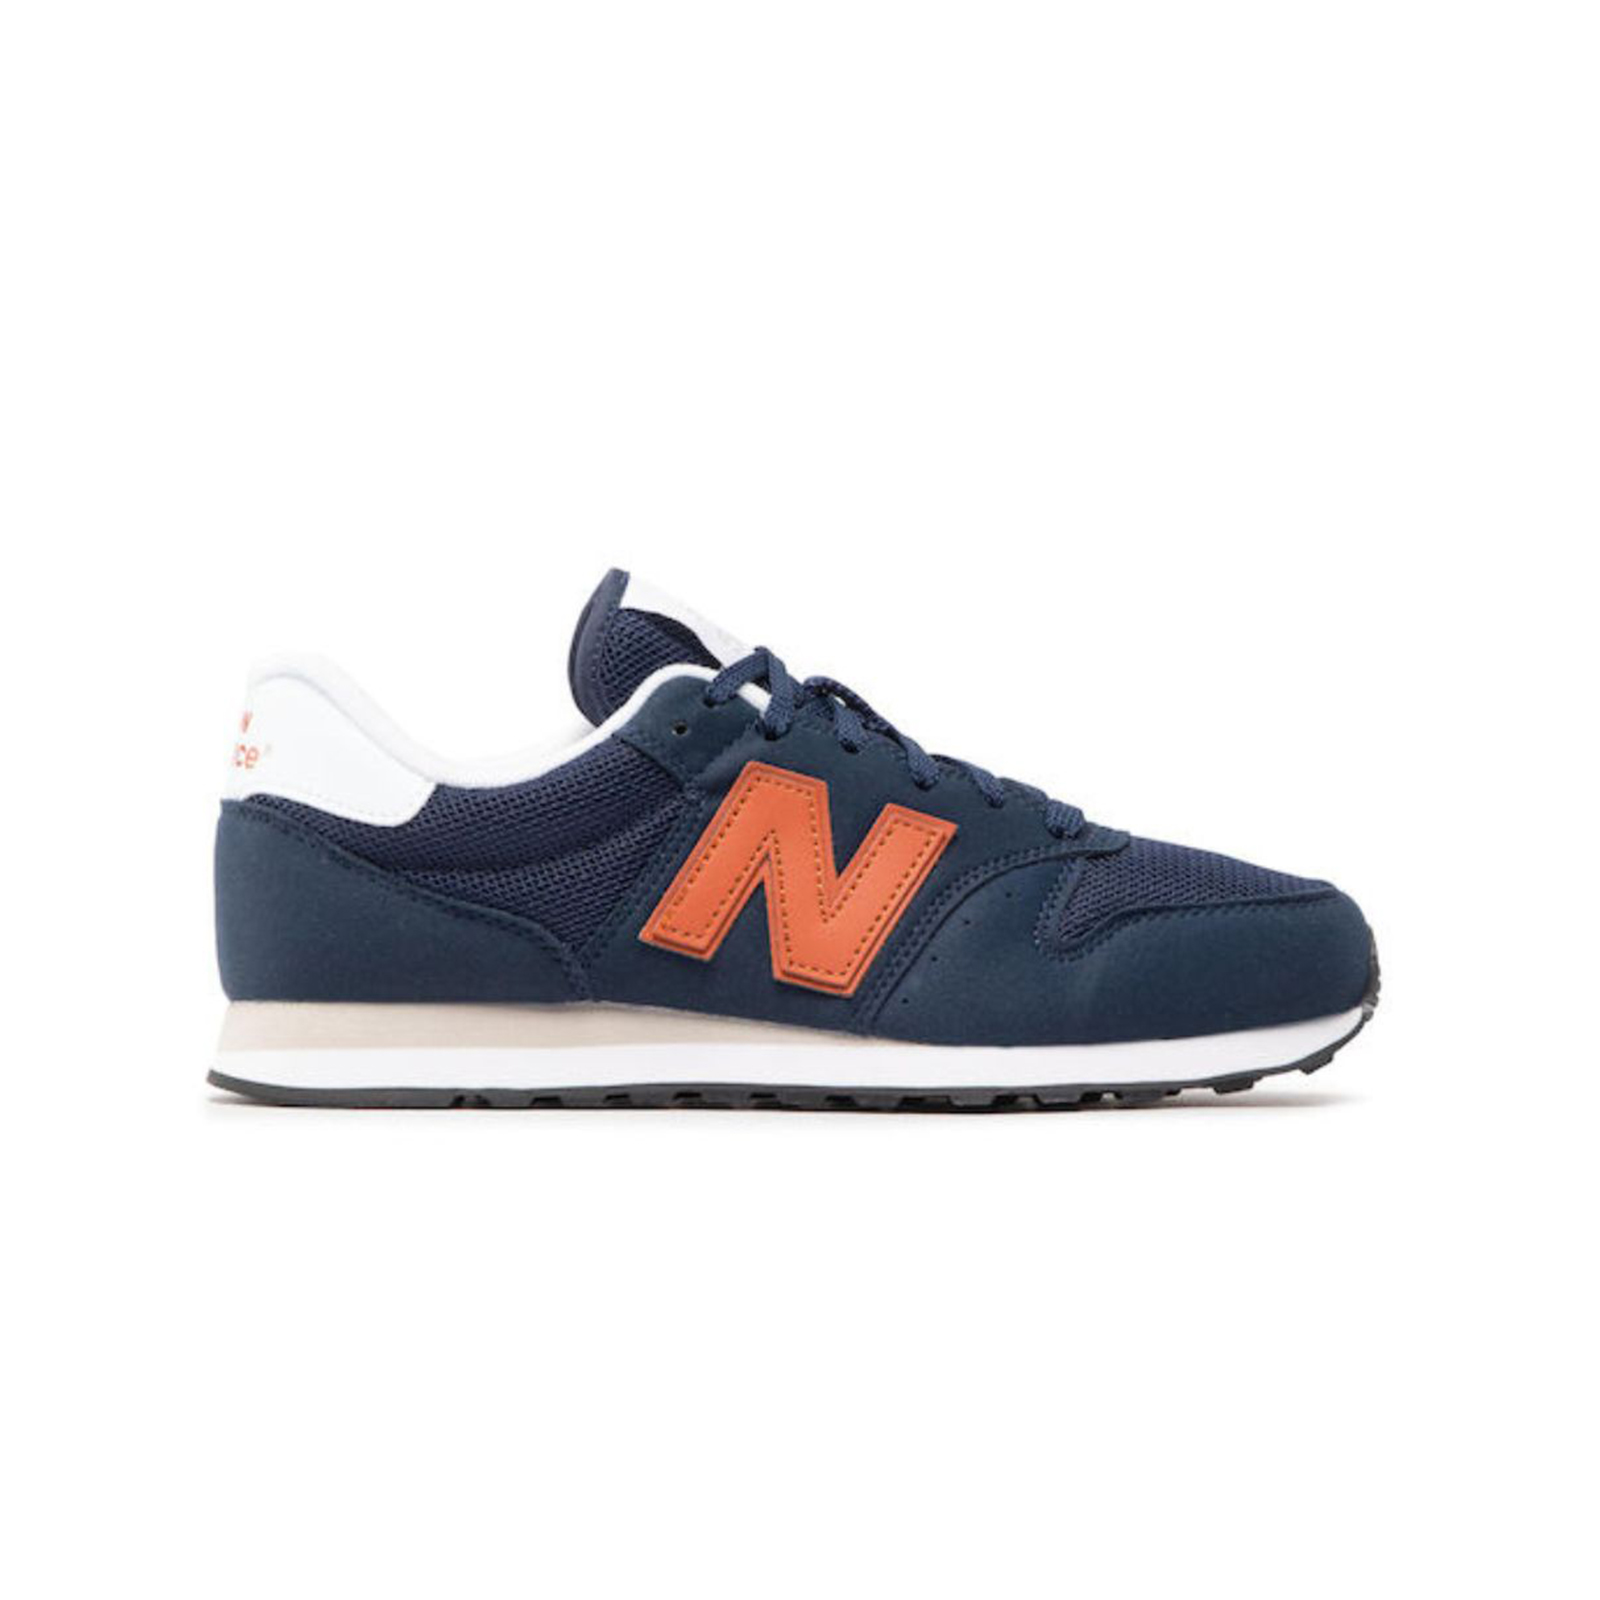 New balance ls - SHOES CLASSIC RUNNING - NATURAL INDIGO Ανδρικά > Παπούτσια > Sneaker > Παπούτσι Low Cut